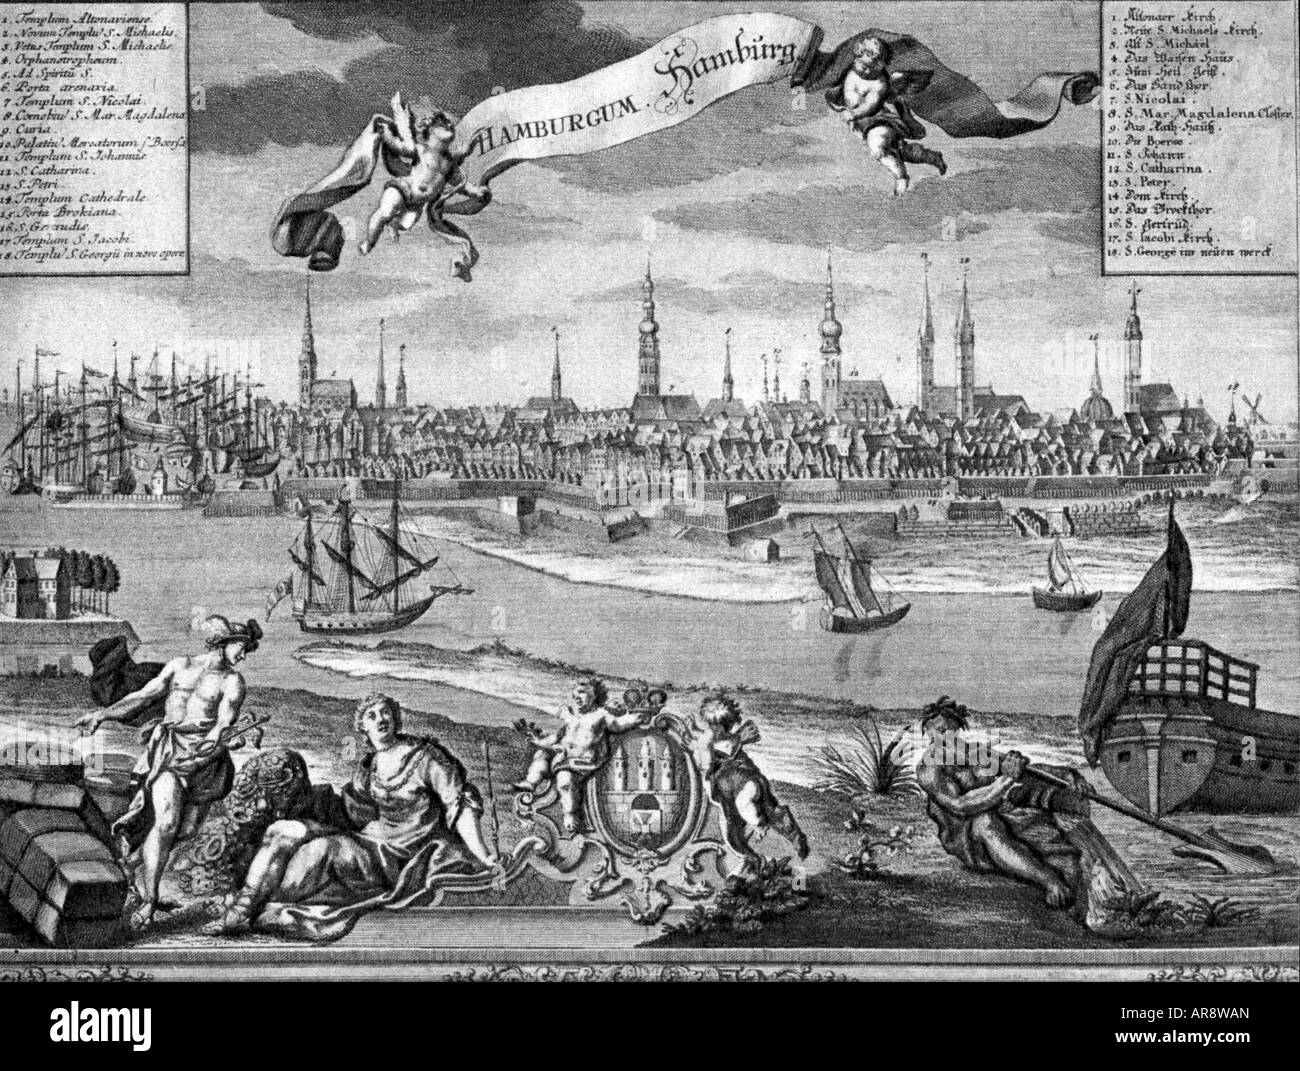 geography/travel, Germany, Hamburg, view, after copper engraving by Chr. Lotter, early 18th century, river Elbe, historic, historical, people, Stock Photo